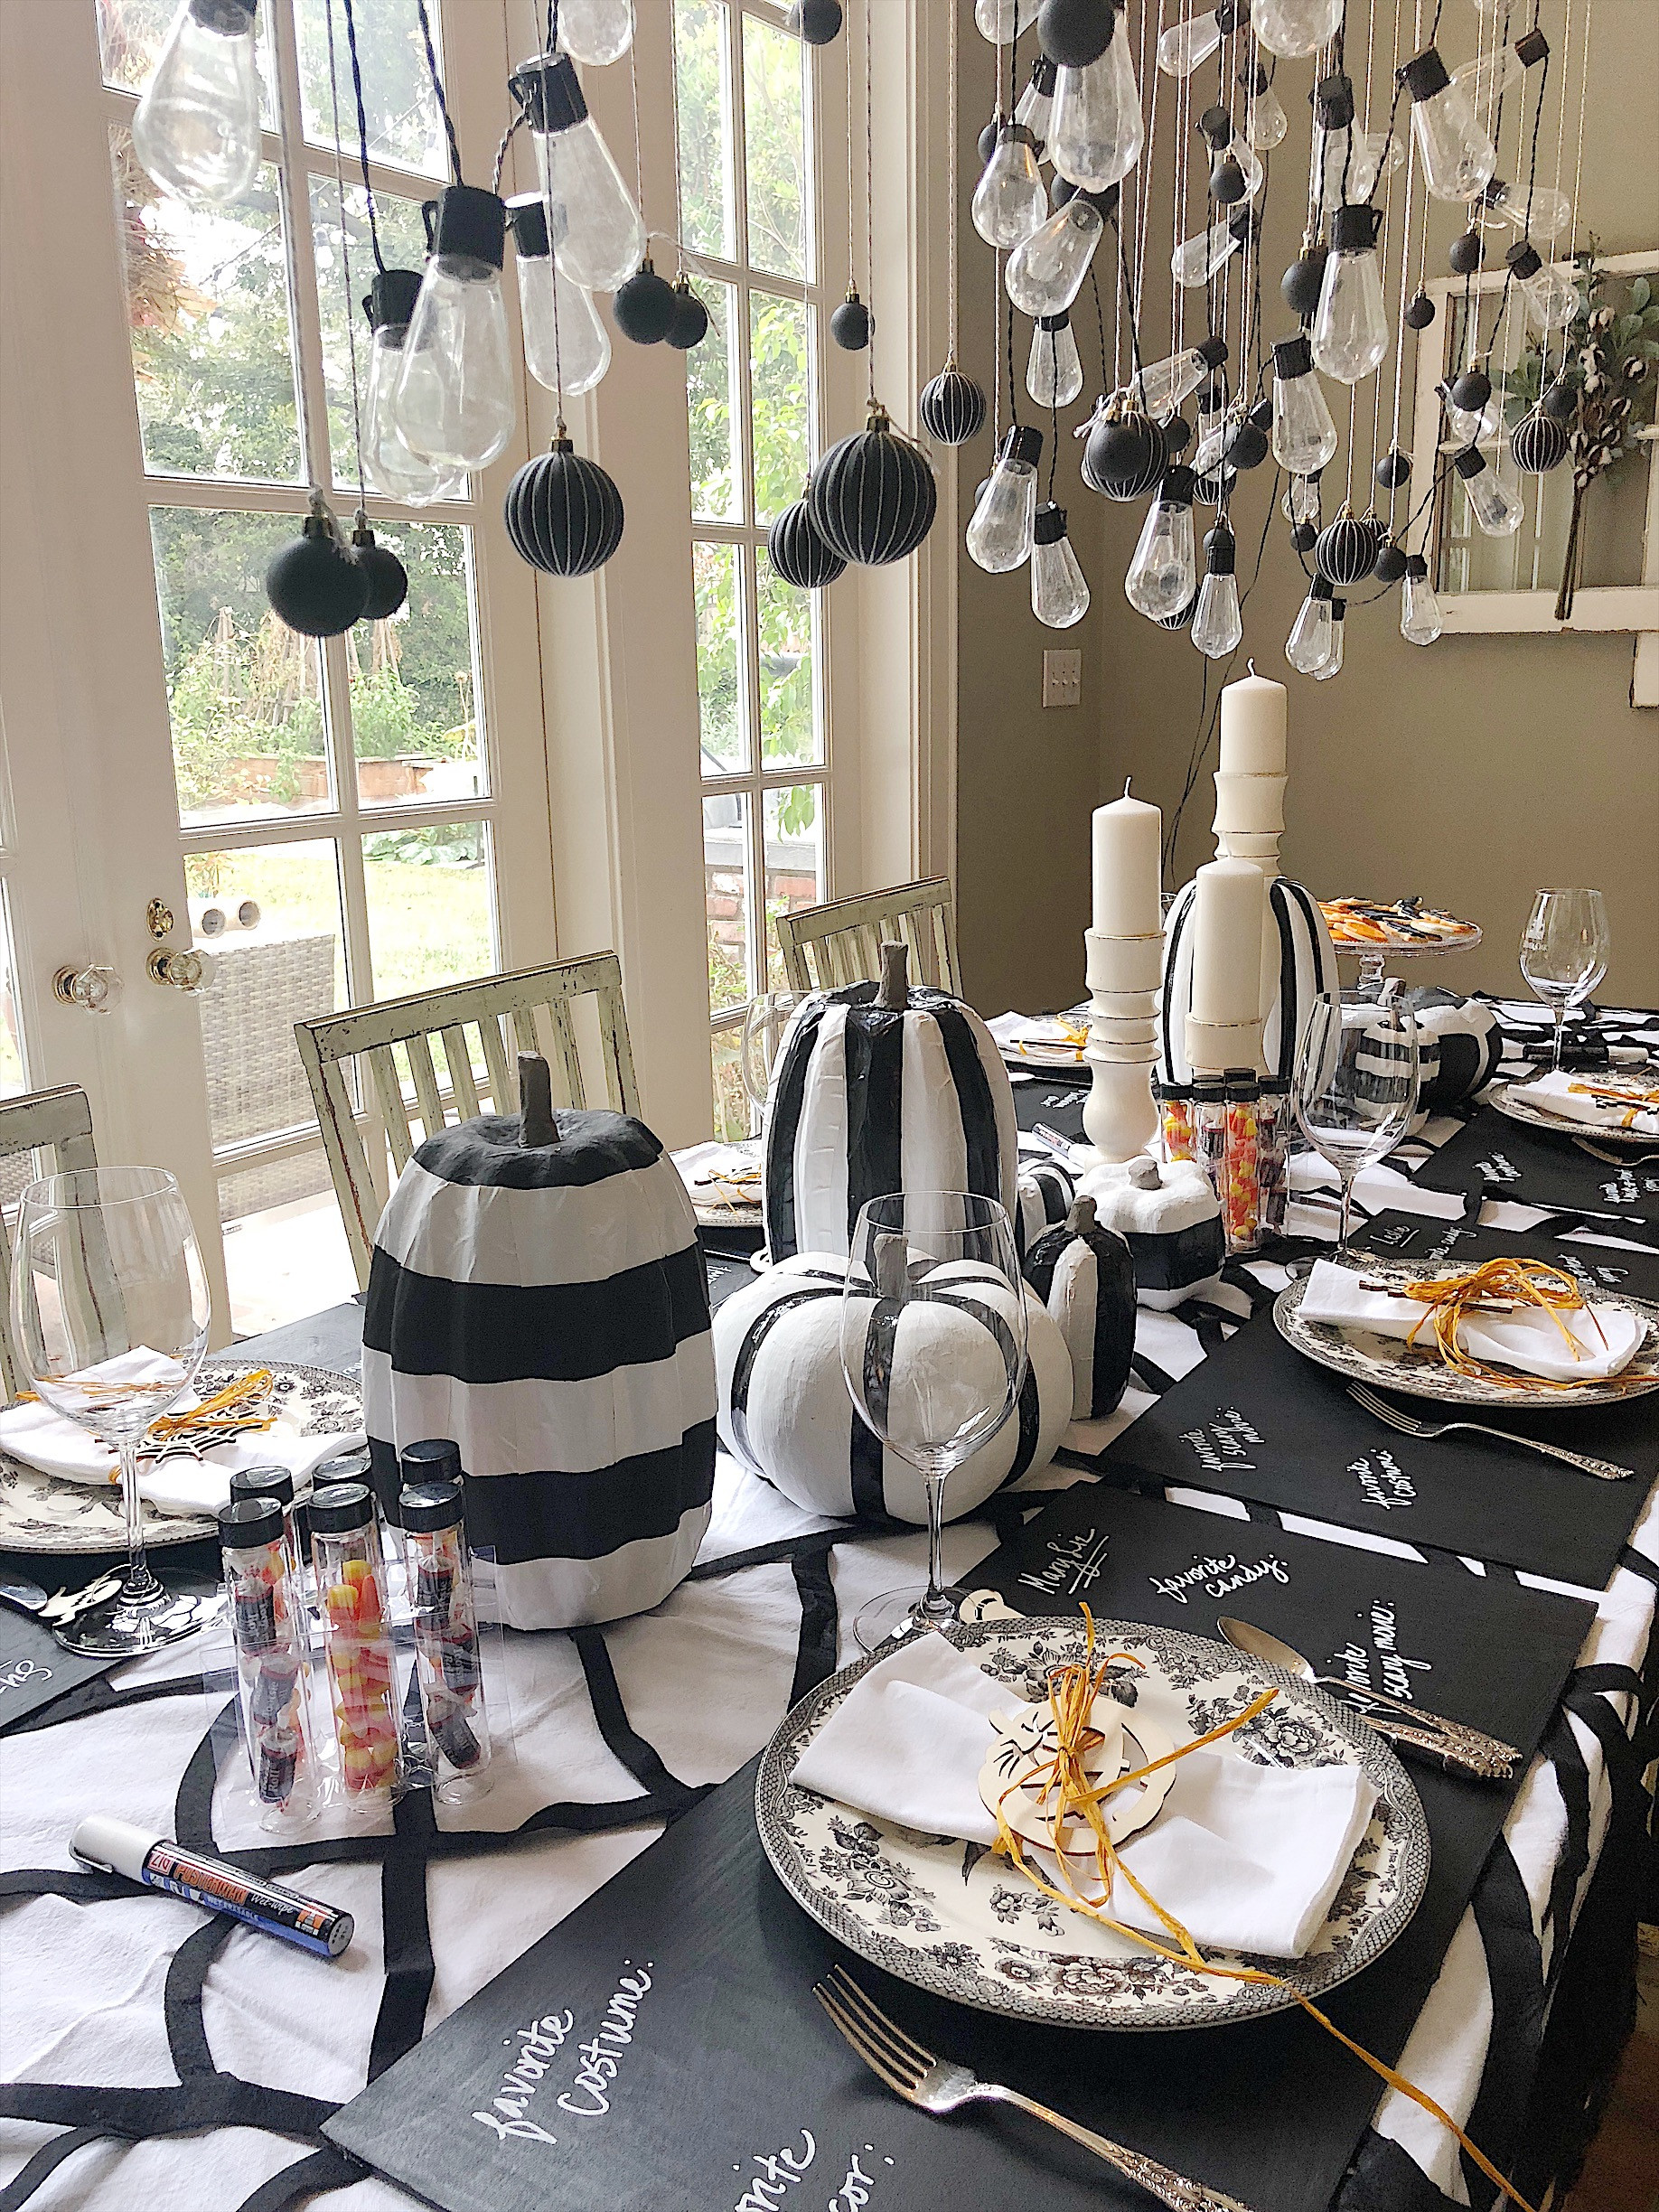 Halloween Table Decorations
 My 100 Year Old Home Sharing DIY projects and affordable